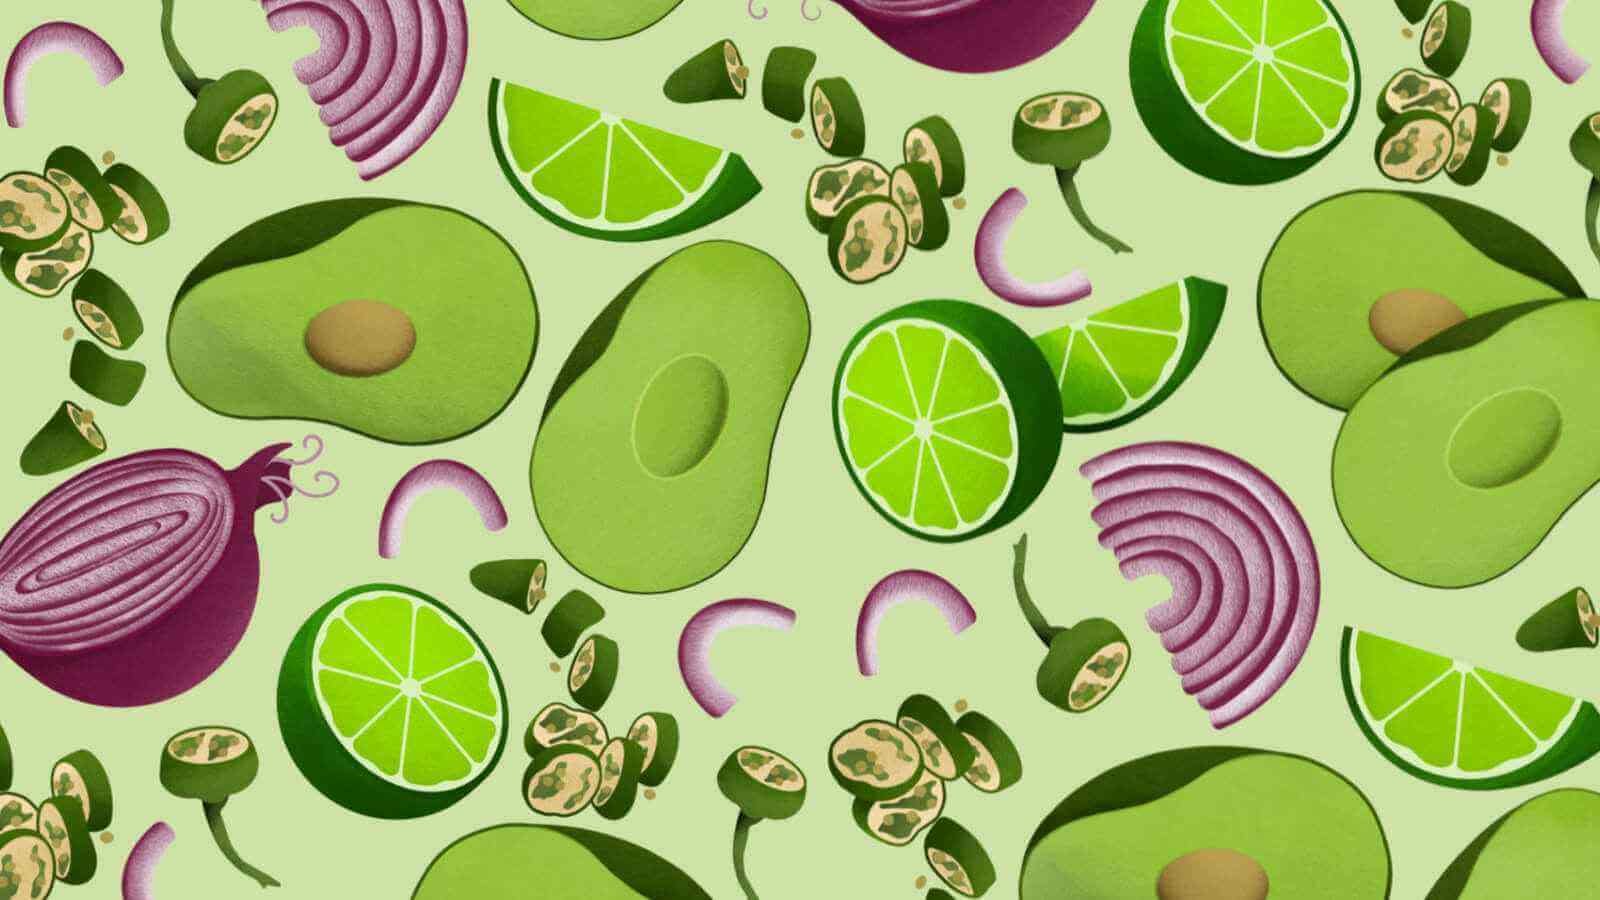 A collection of drawn fruits and vegetables